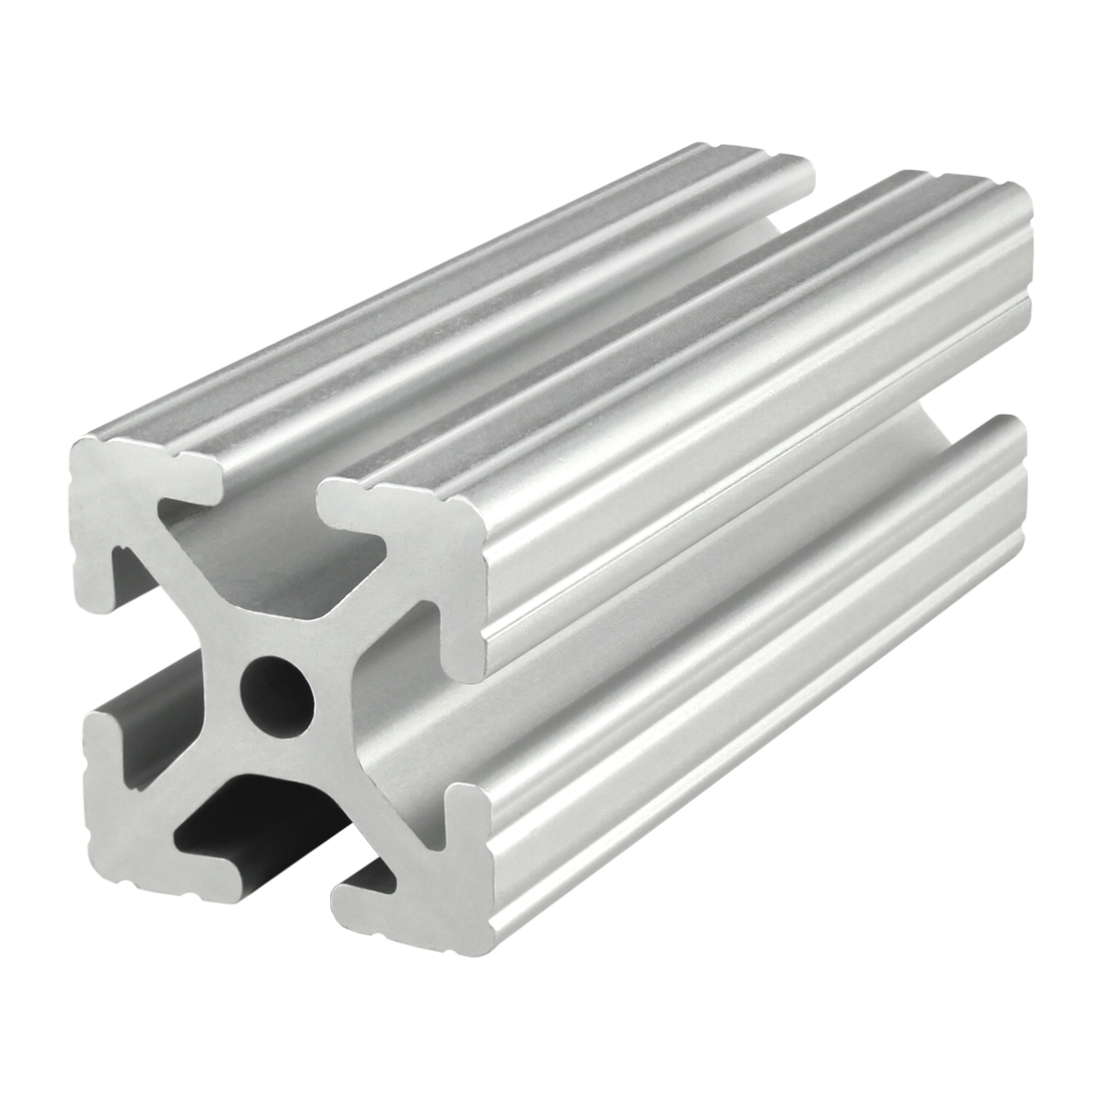 【1515-72】1.5" X 1.5" T-SLOTTED EXTRUSION